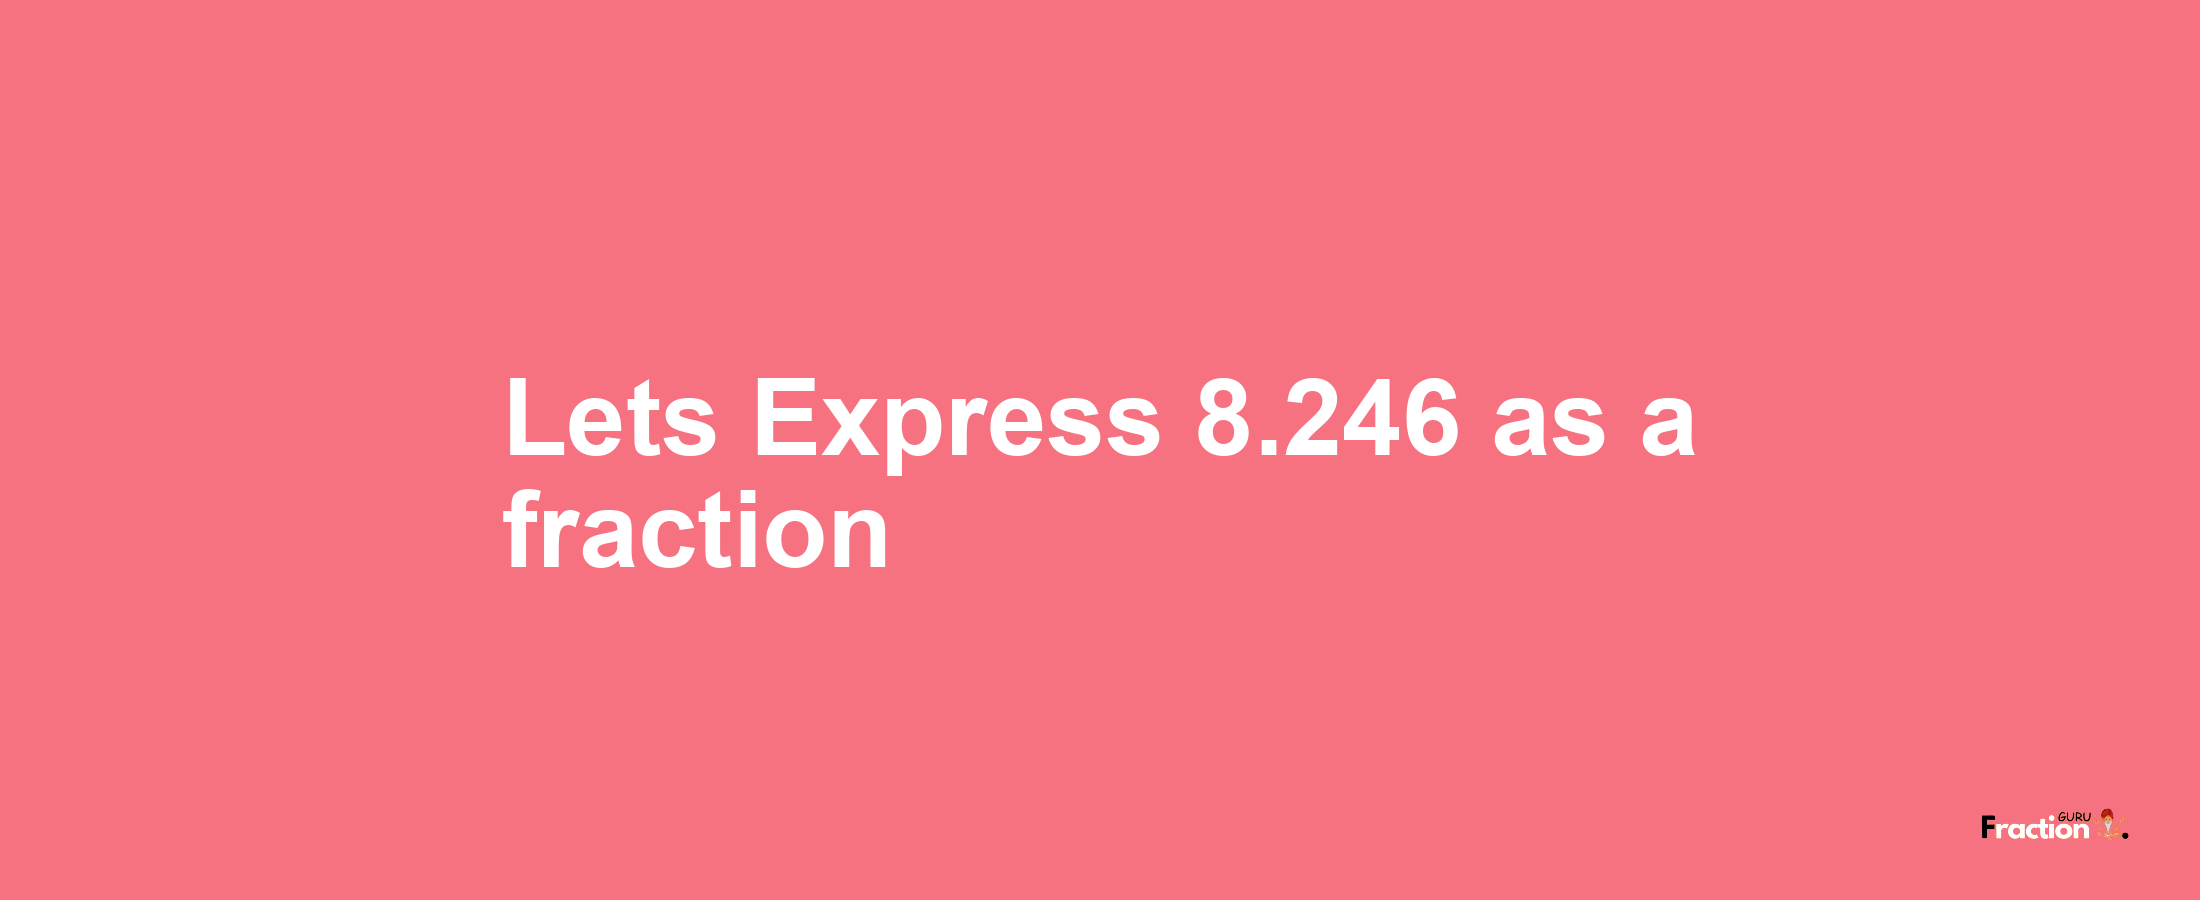 Lets Express 8.246 as afraction